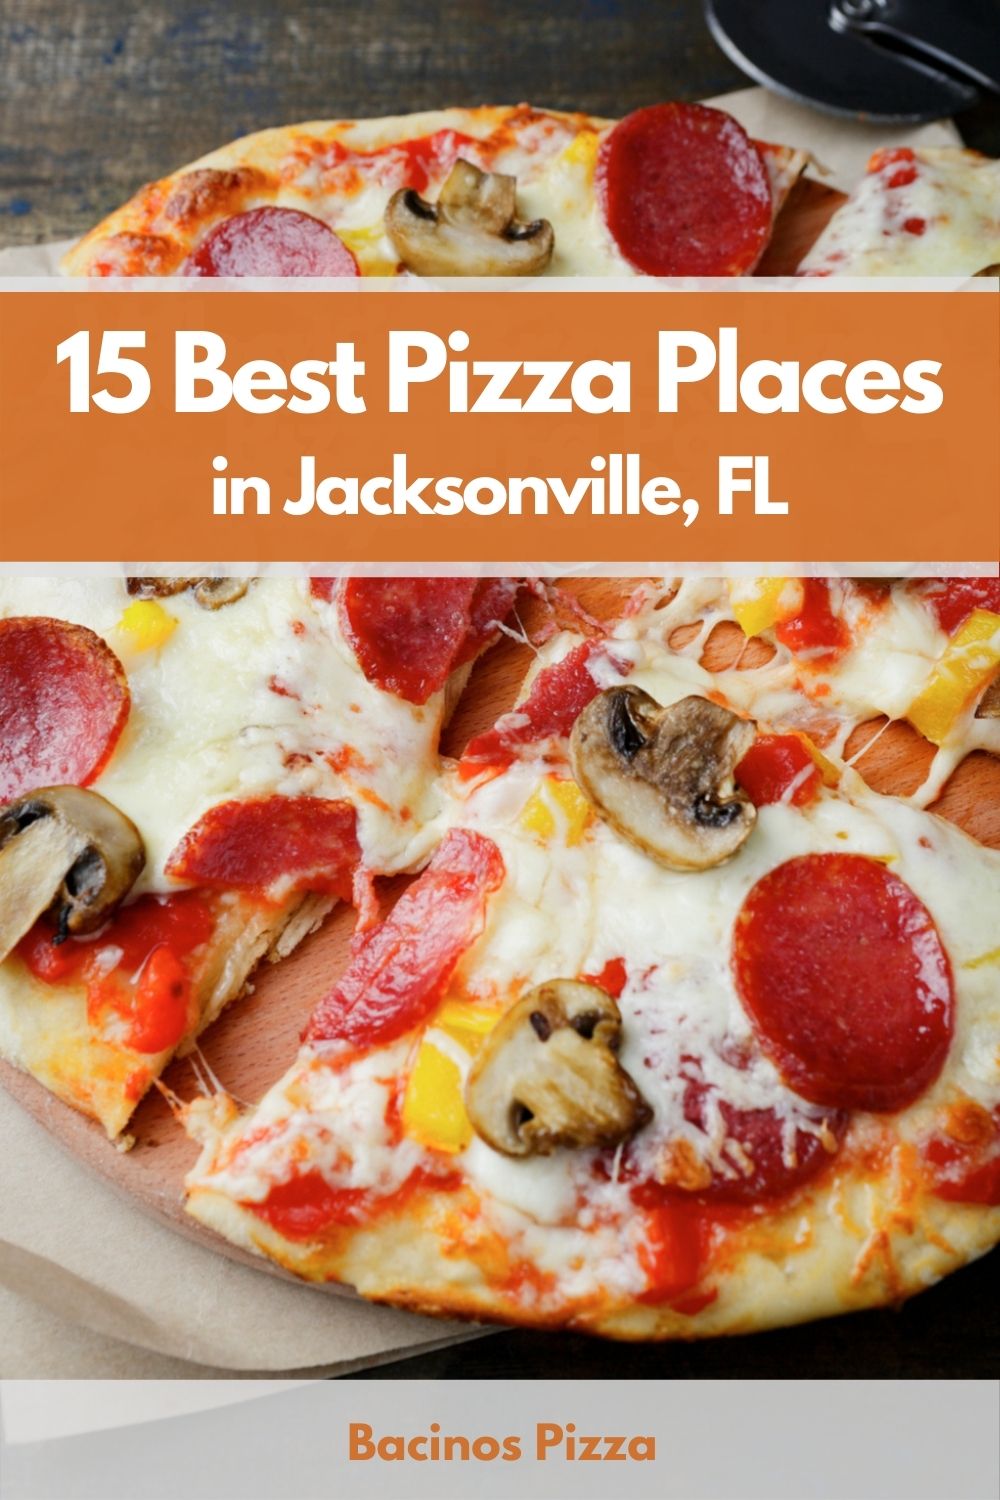 15 Best Pizza Places in Jacksonville, FL pin